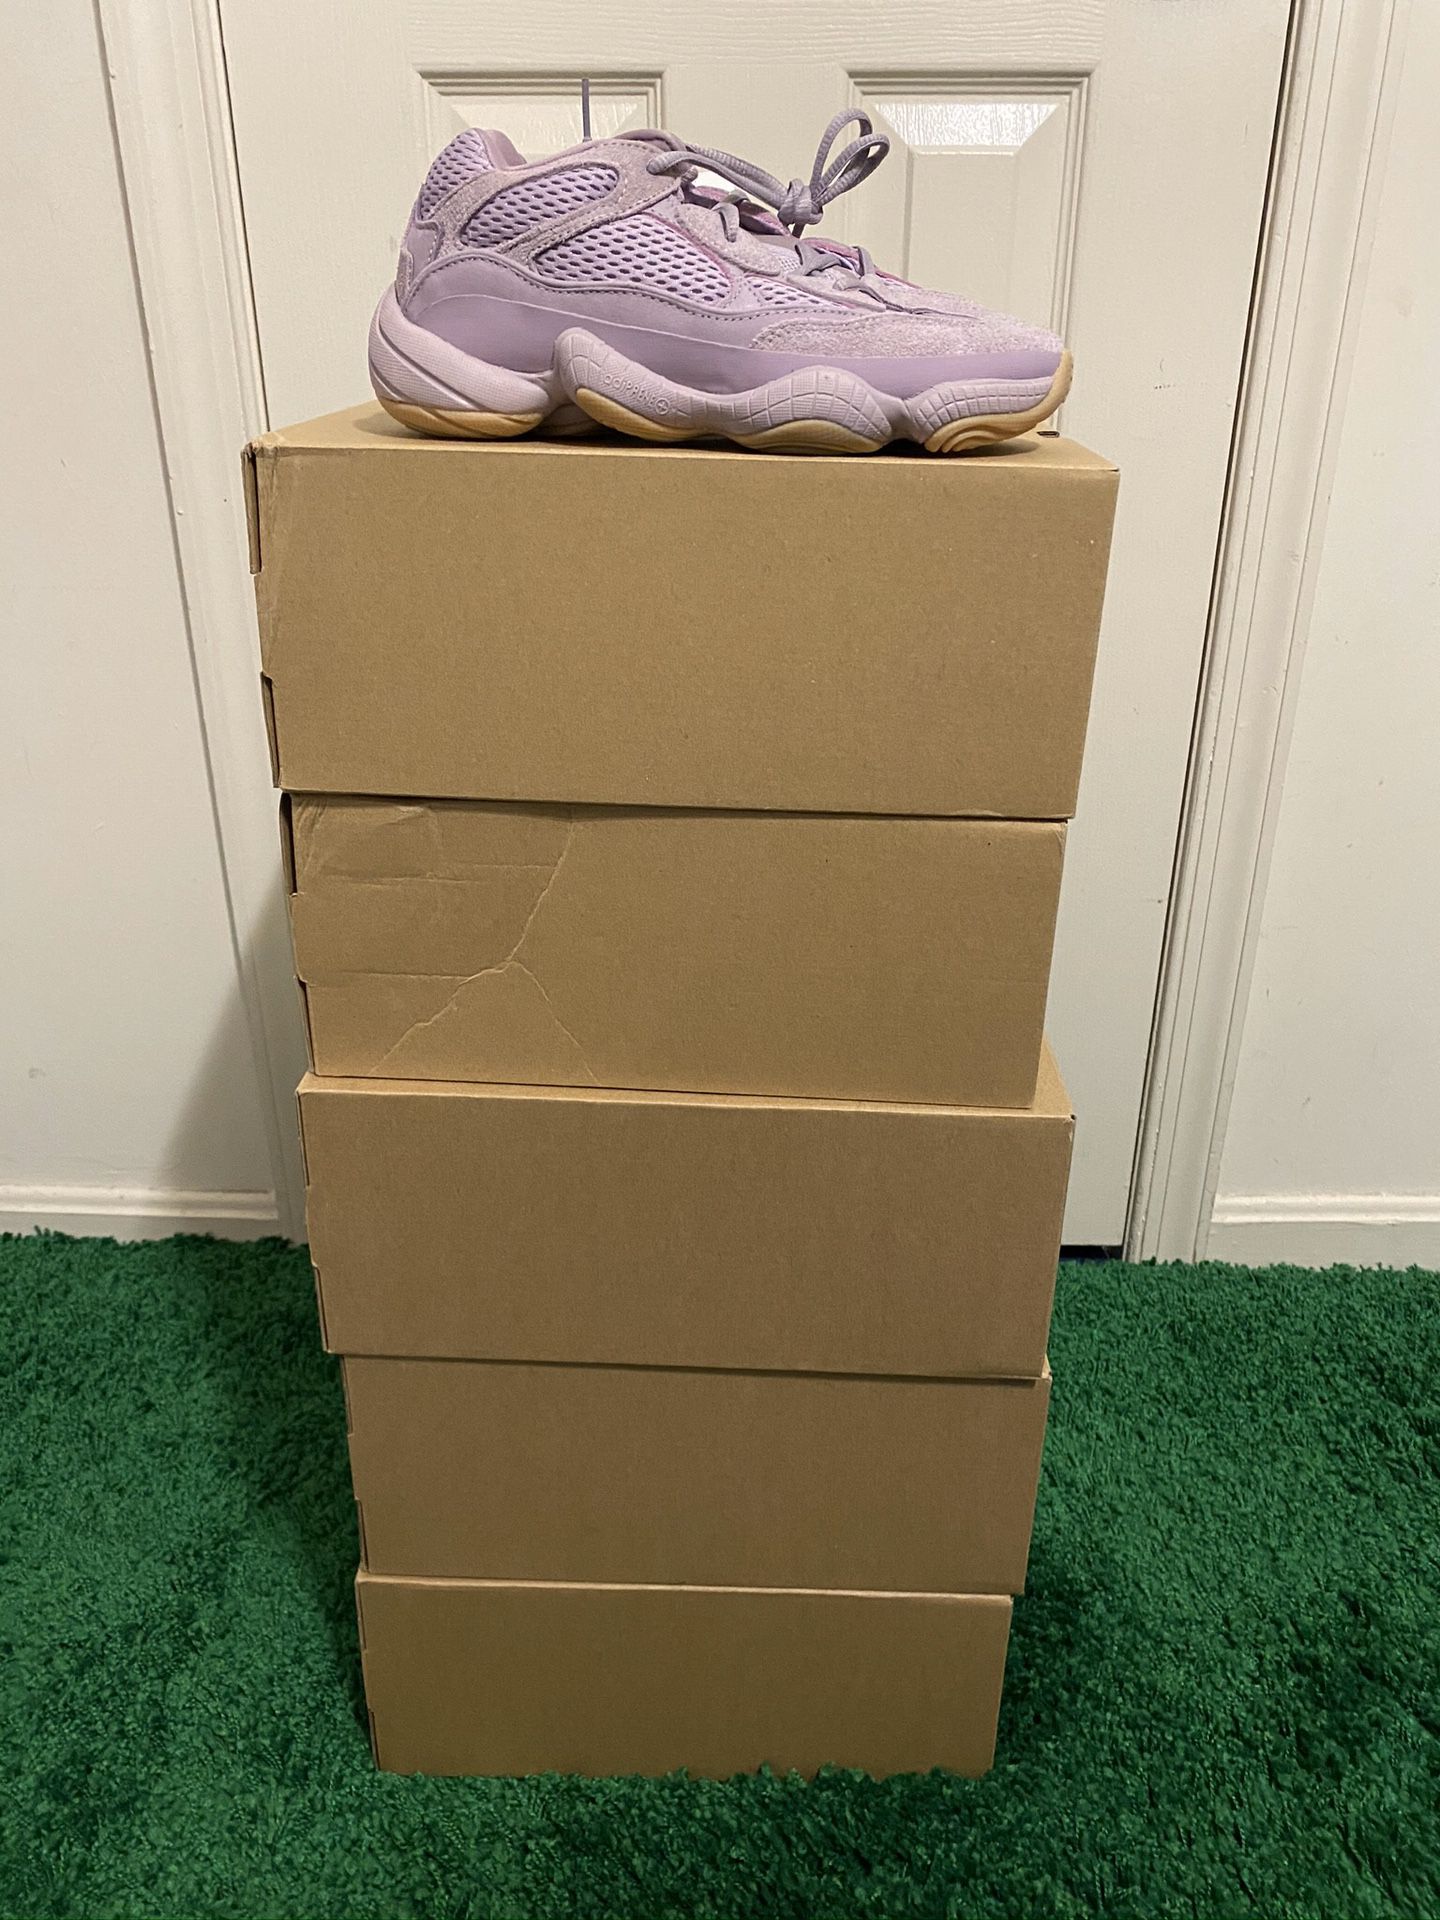 BRAND NEW ADIDAS YEEZY 500 SOFT VISION SIZE 4 4.5 5.5 6 7.5